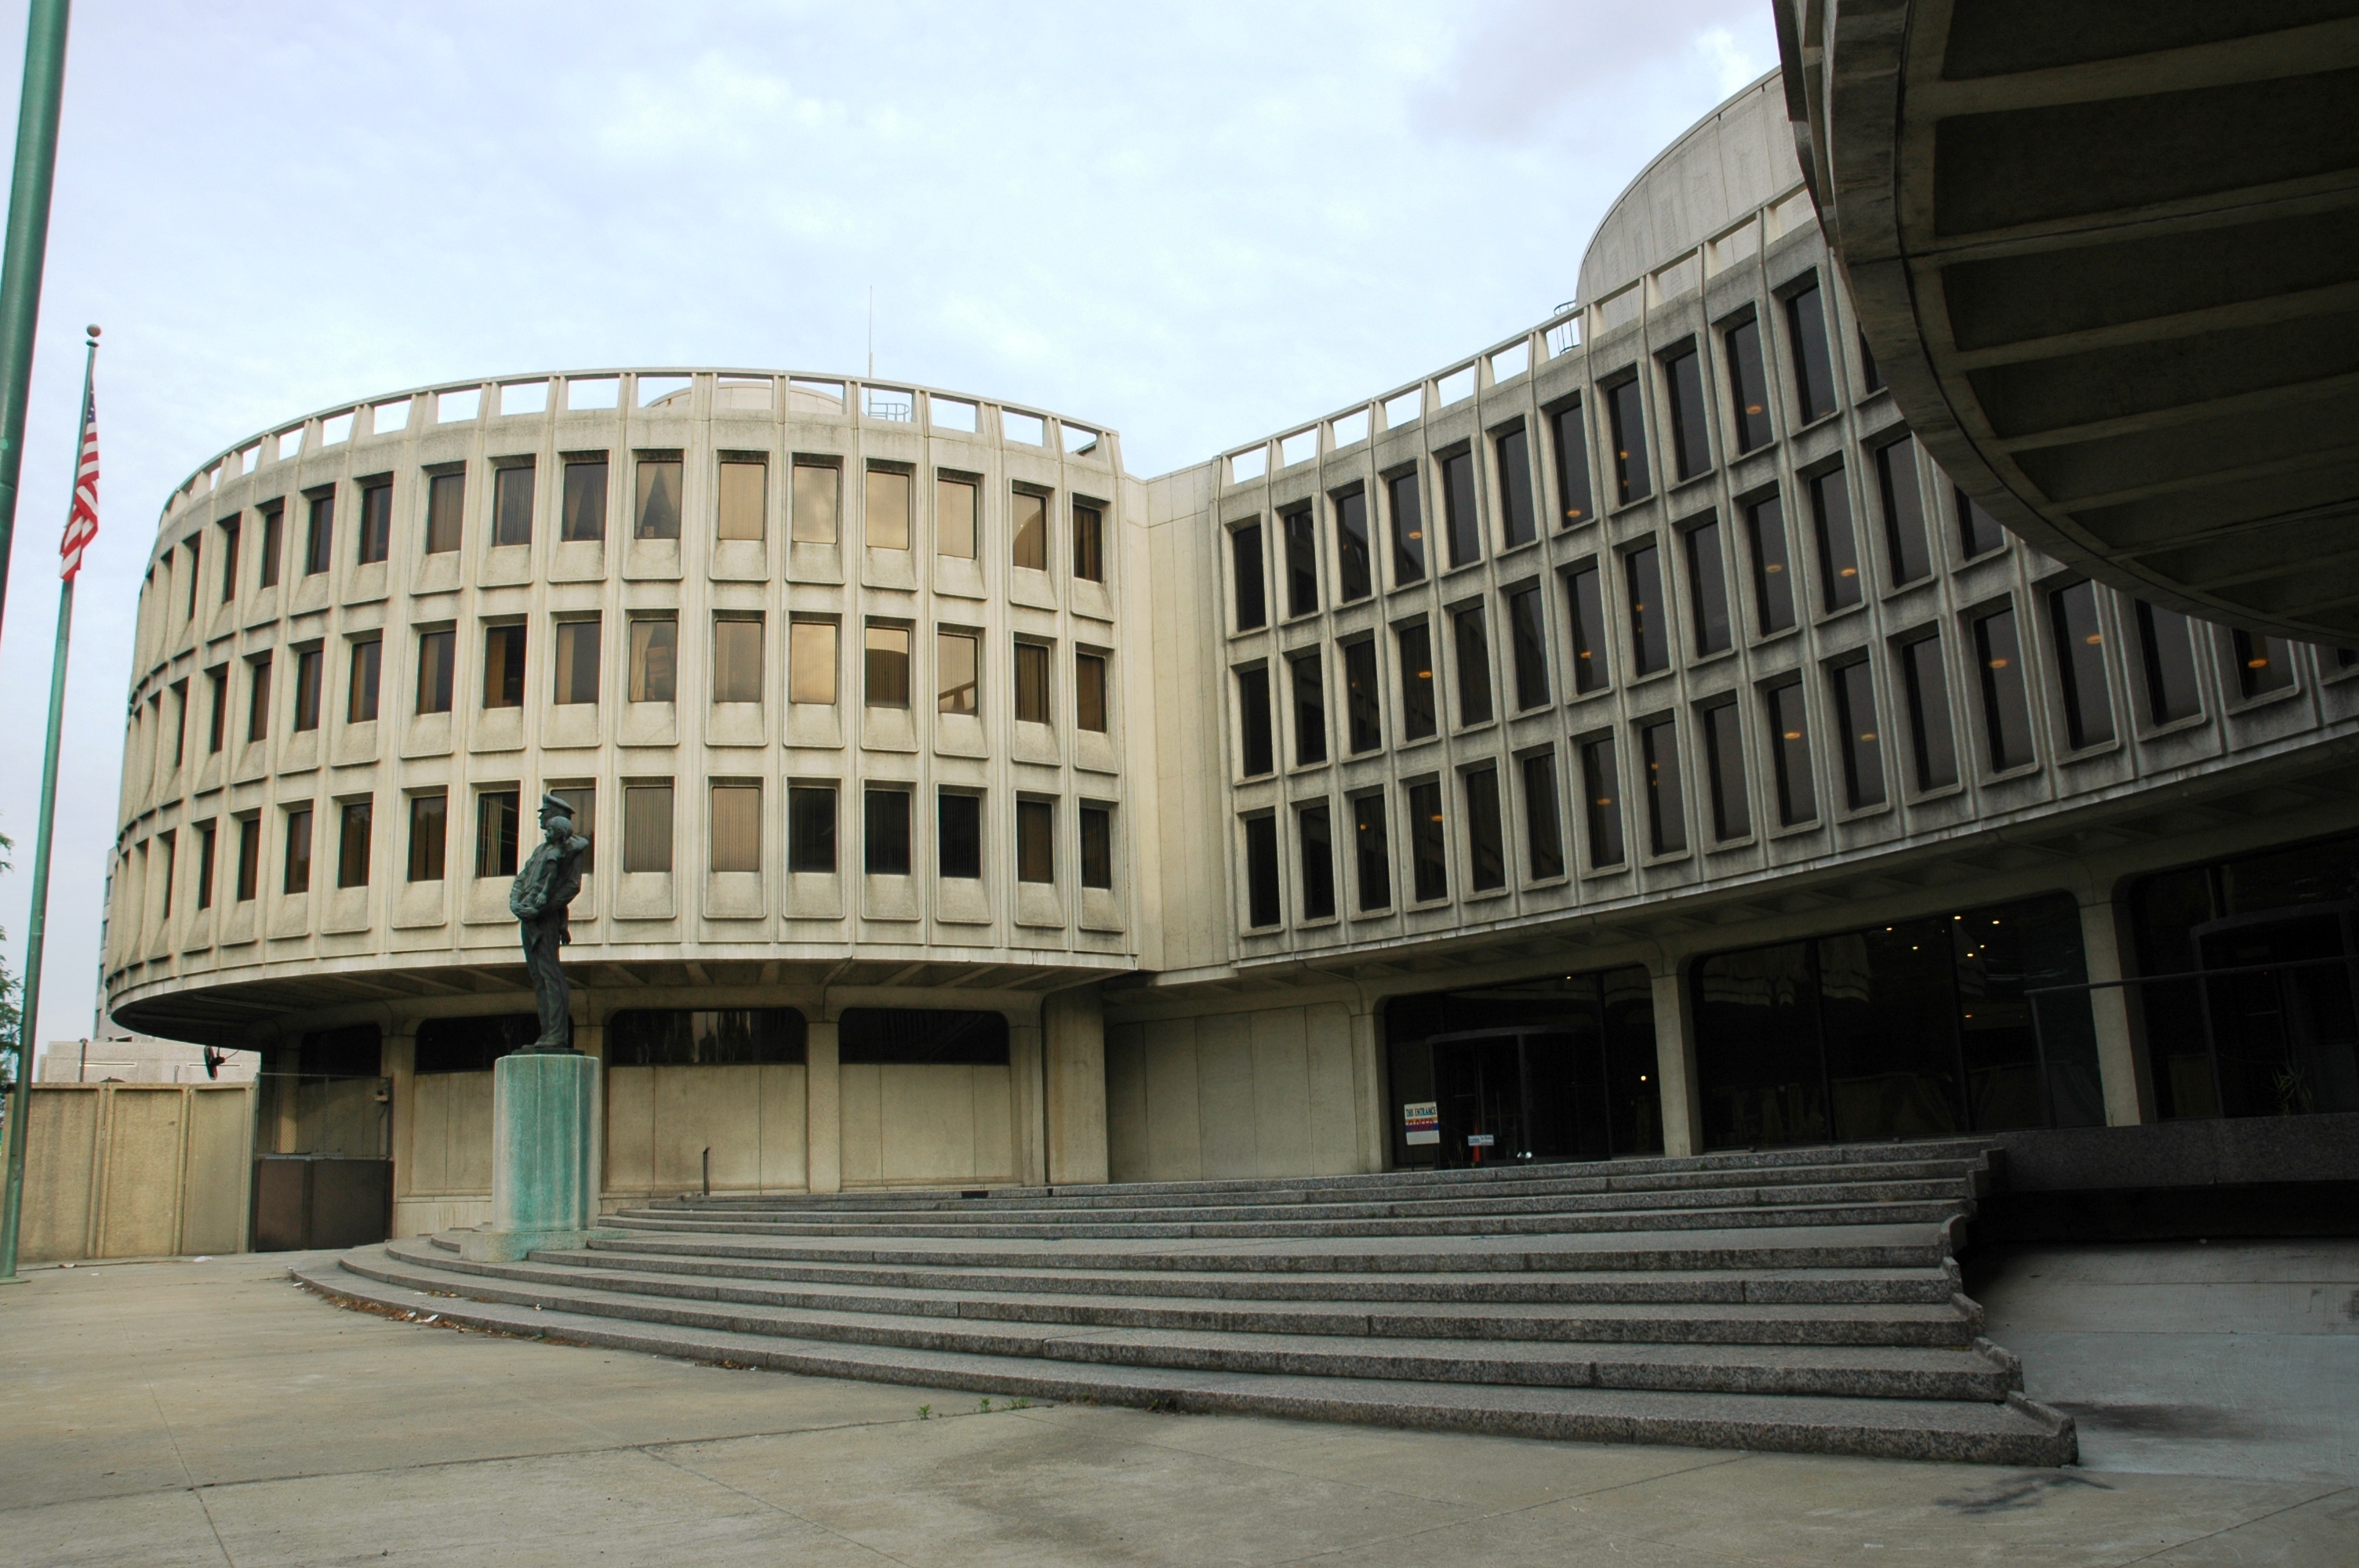 The Police Administration Building, 700 Race St., was designed in the early 1960s by Geddes, Brecher, Qualls & Cunningham.